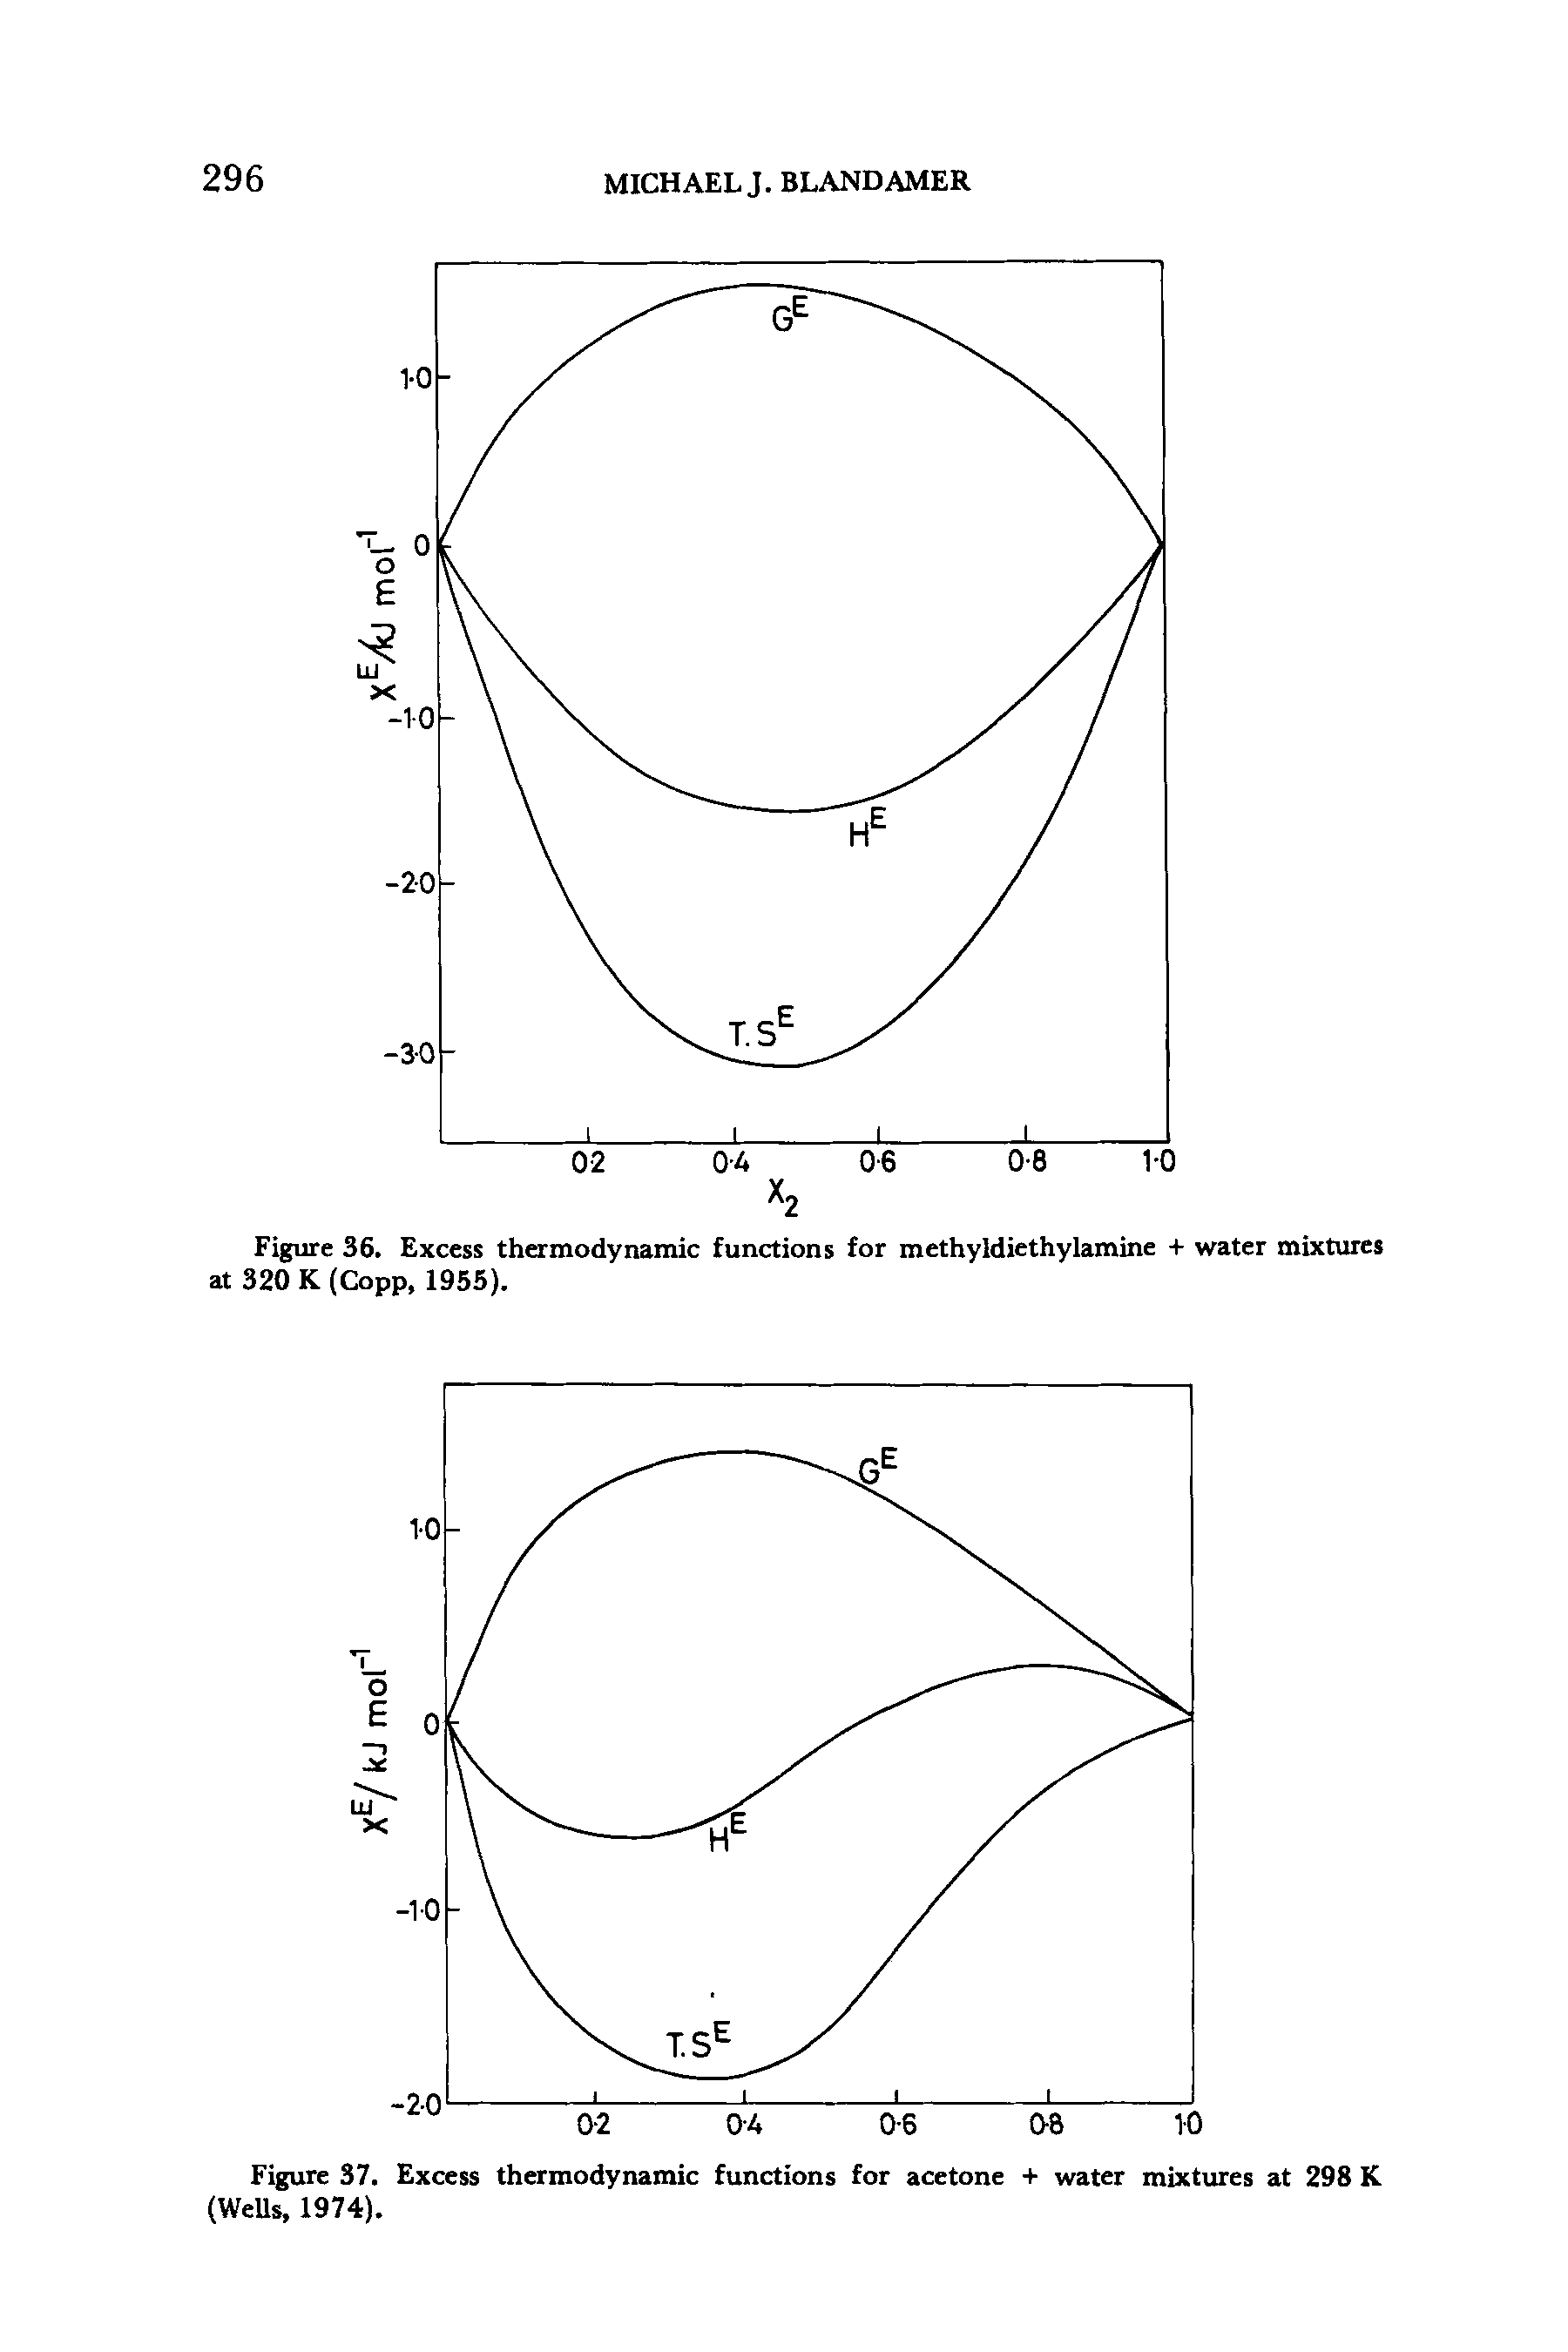 Figure 36. Excess thermodynamic functions for methyldiethylamine + water mixtures at 320 K (Copp, 1955).